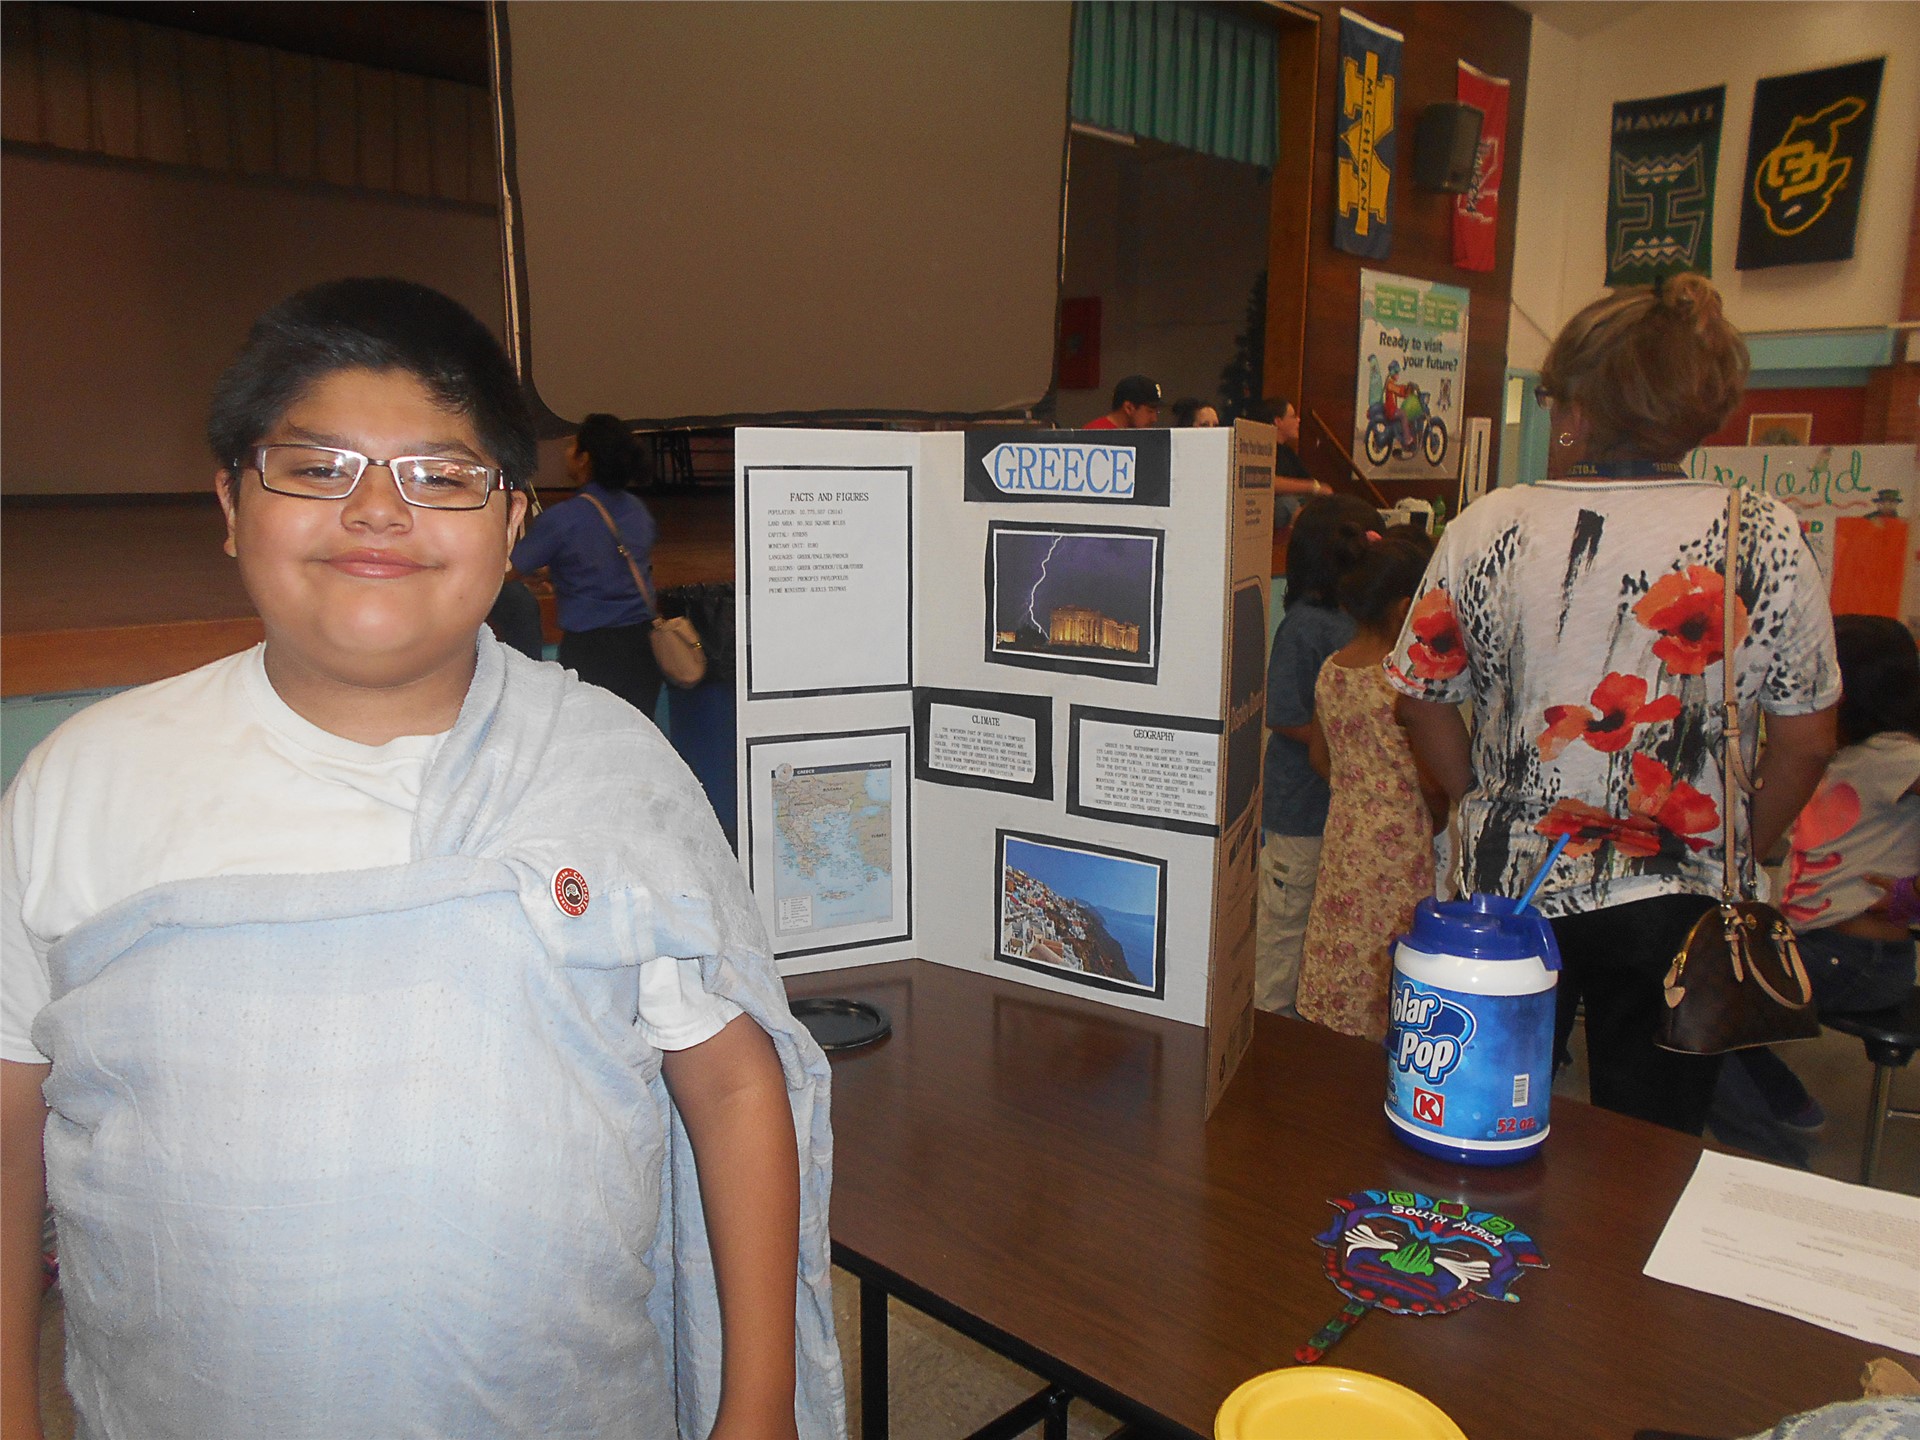 Toltec Elementary School Home Page